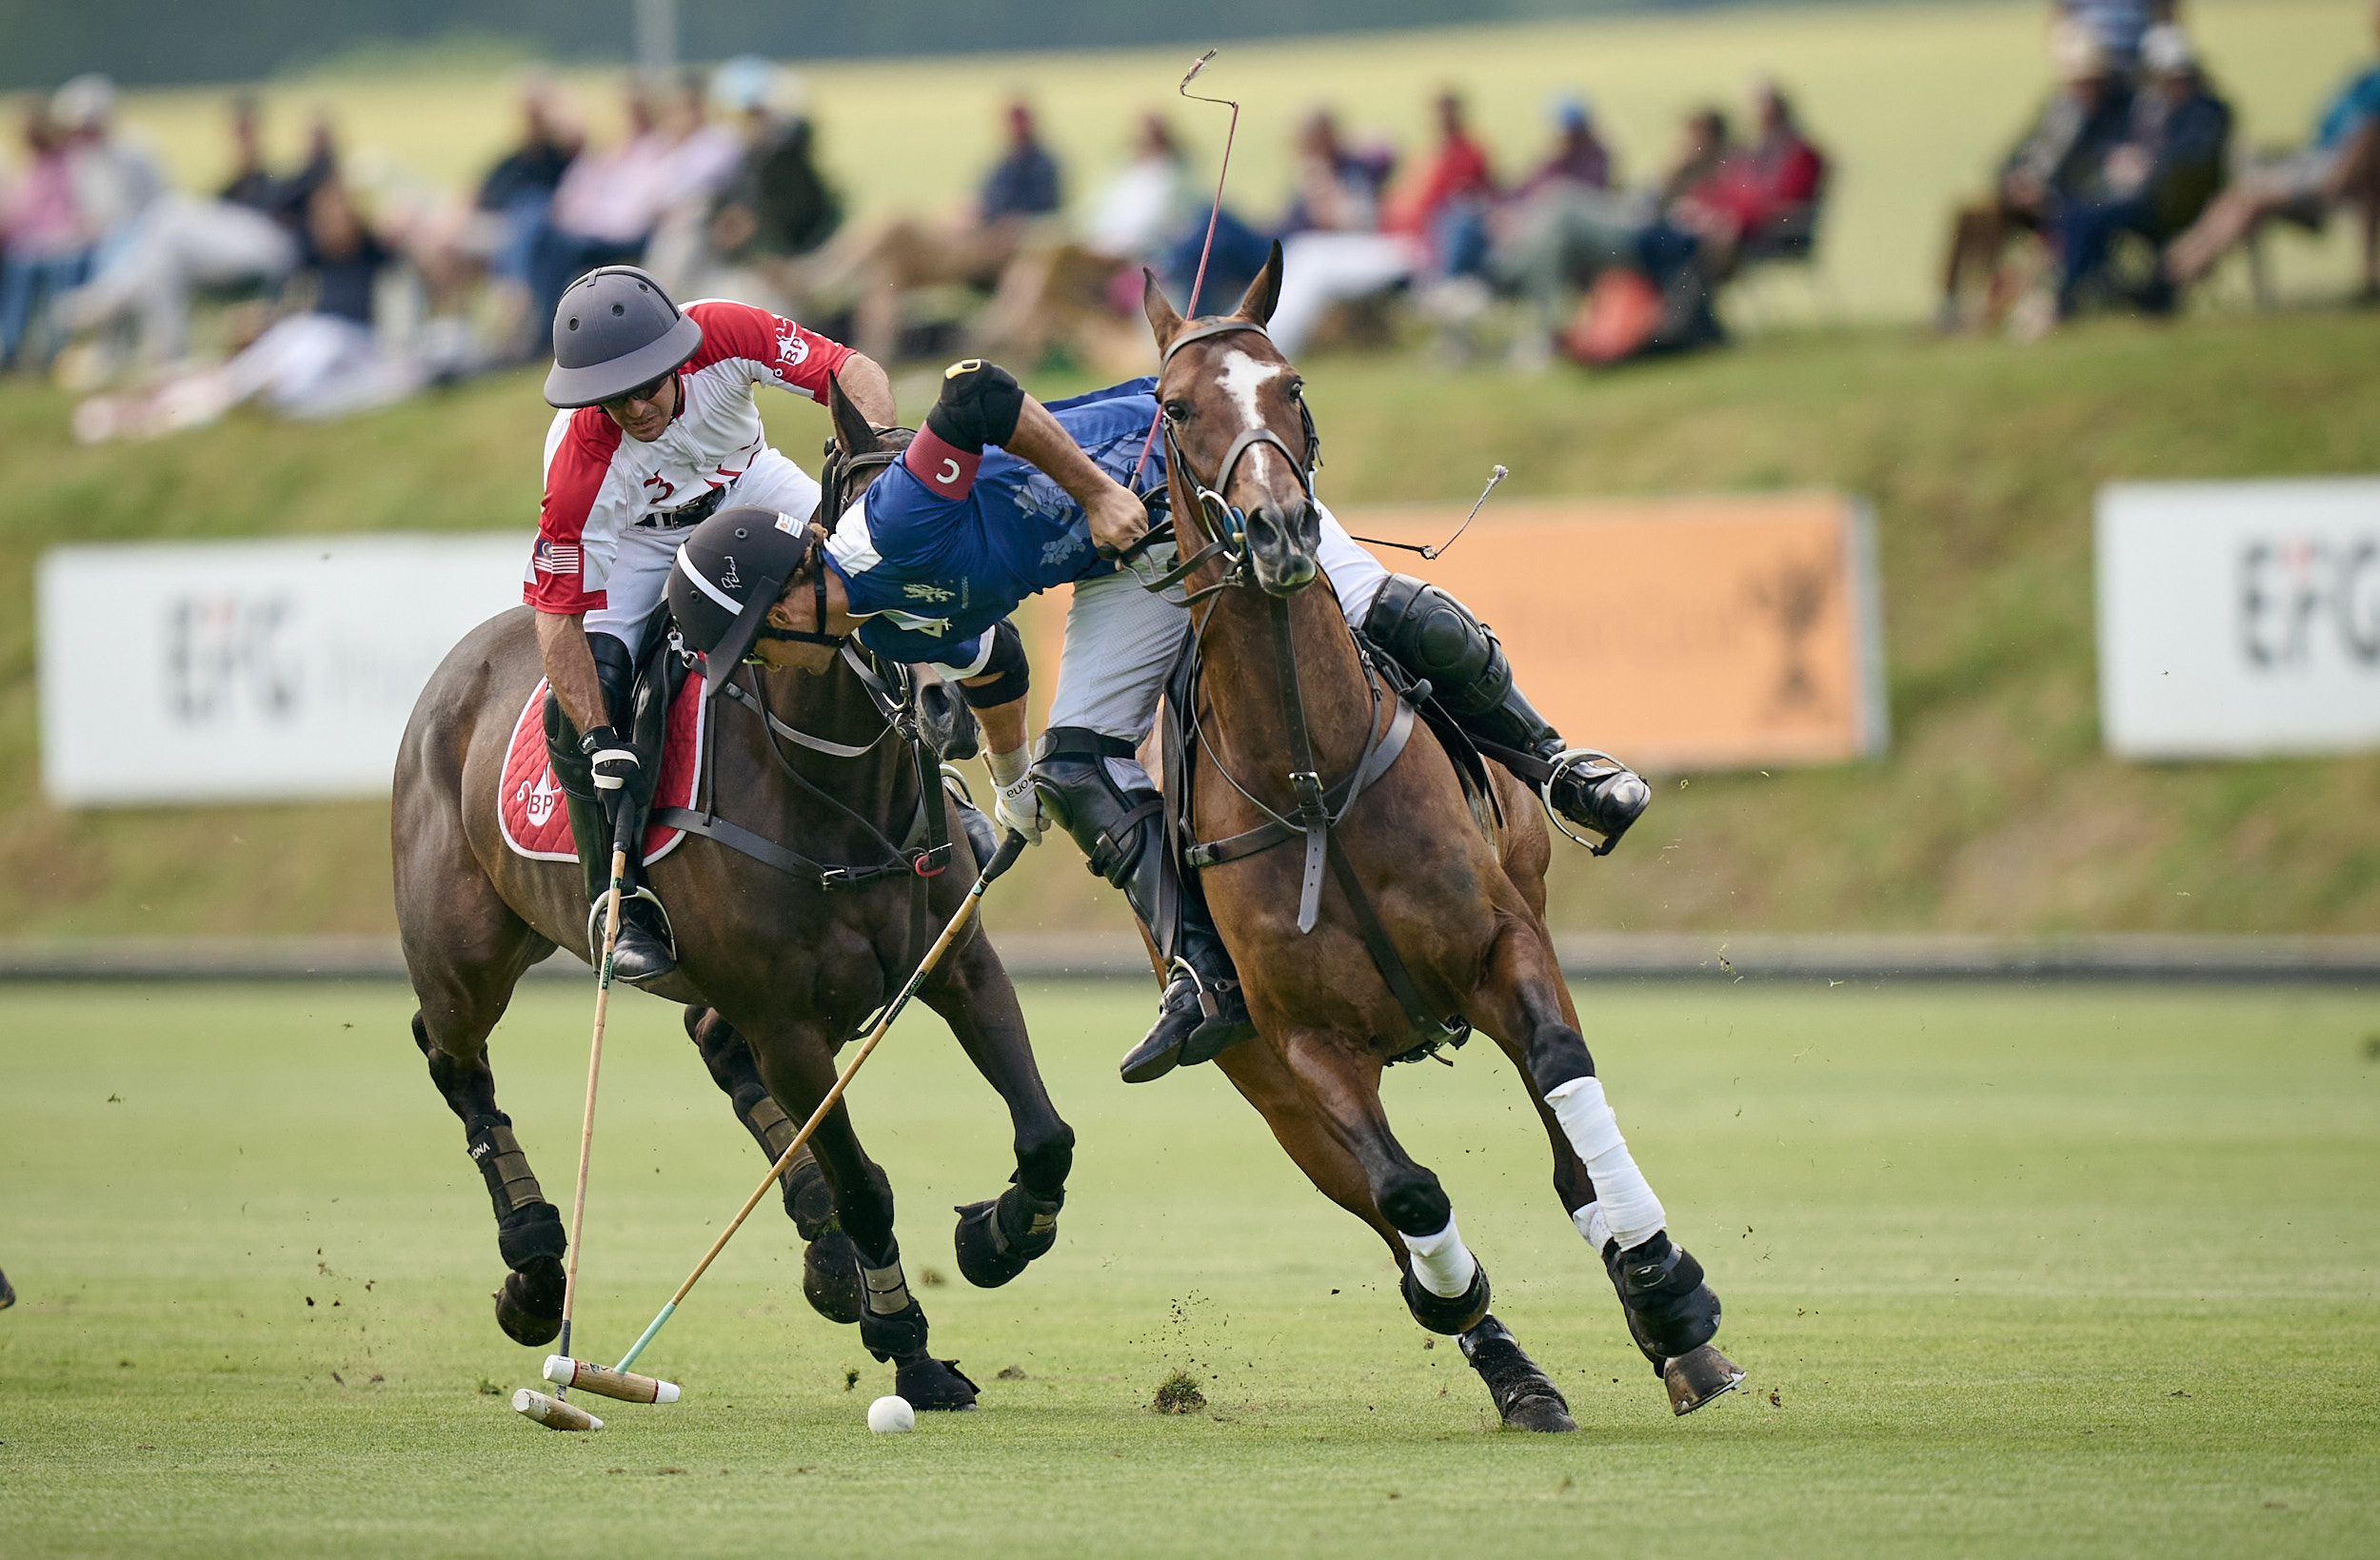 Polo ride off at Brooks Cowdray Polo Club